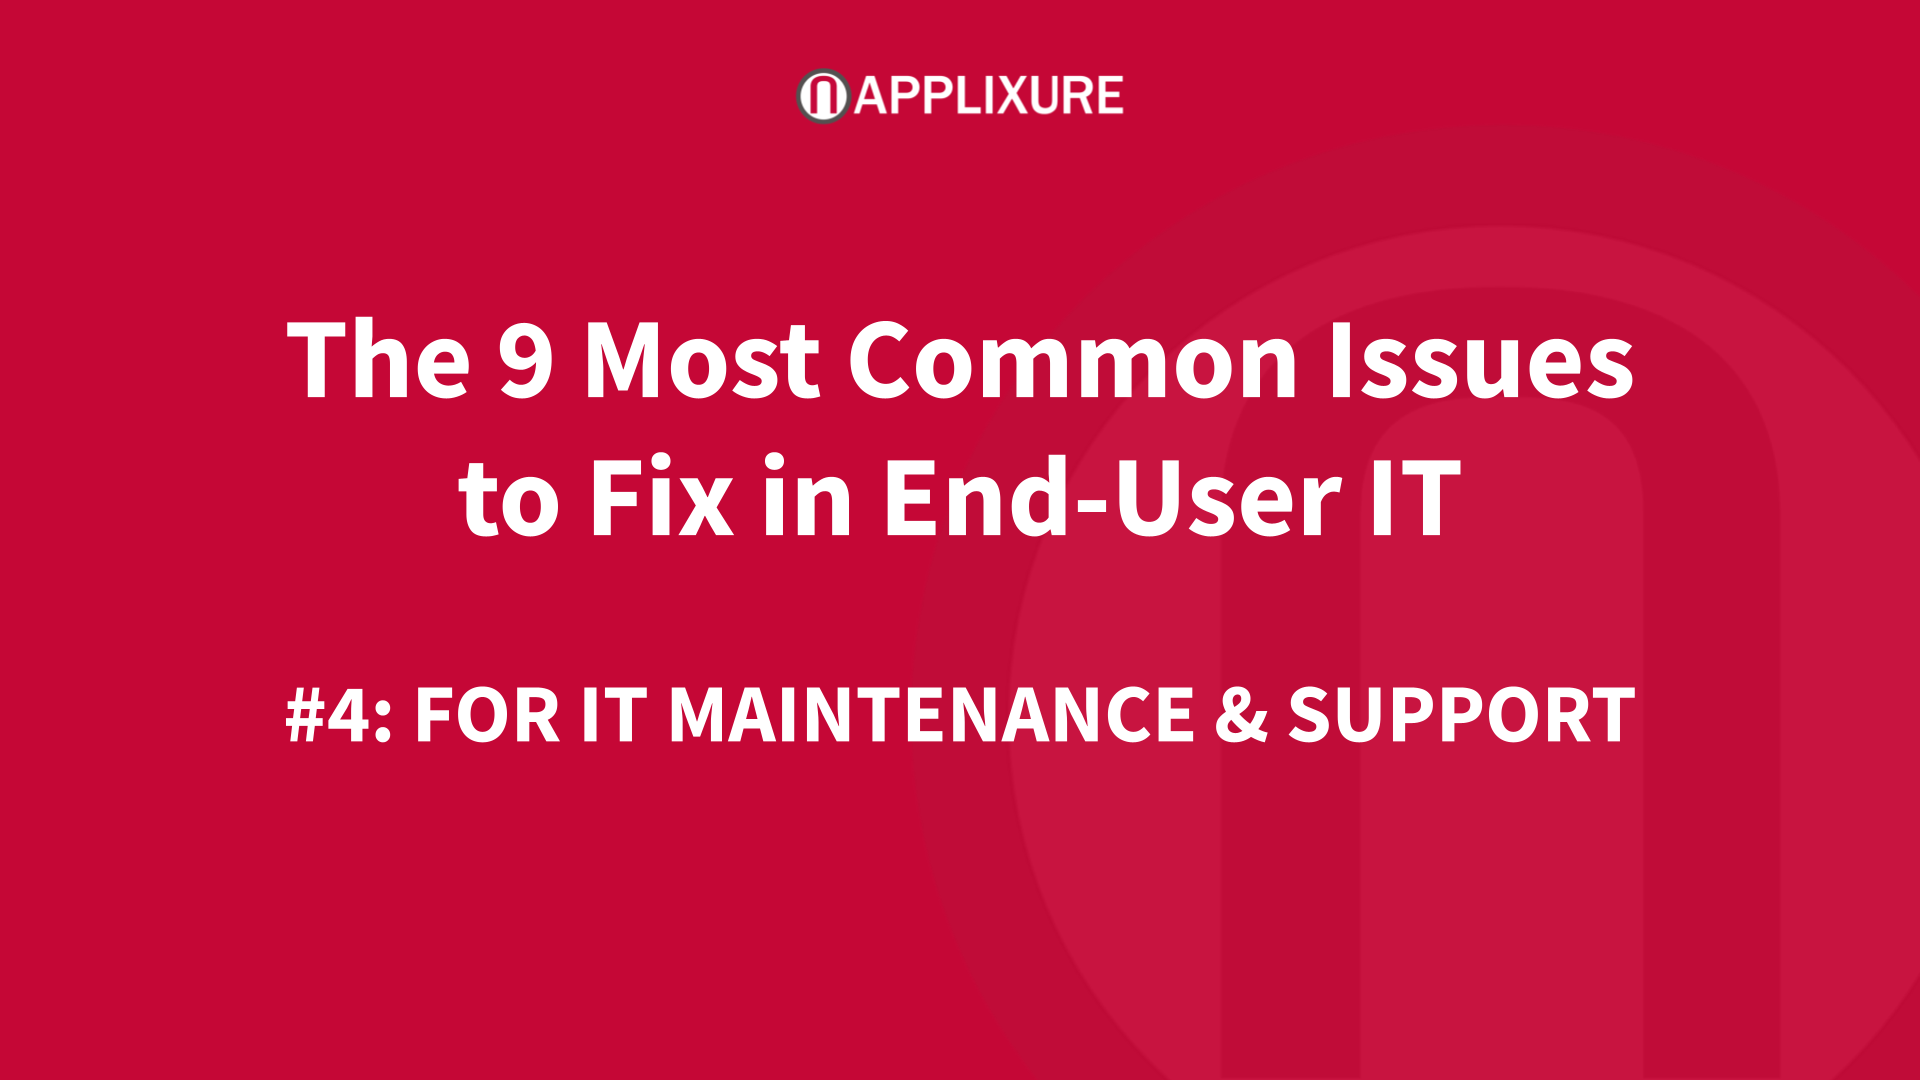 3 Most Common End-User IT Issues Affecting IT Maintenance and Support